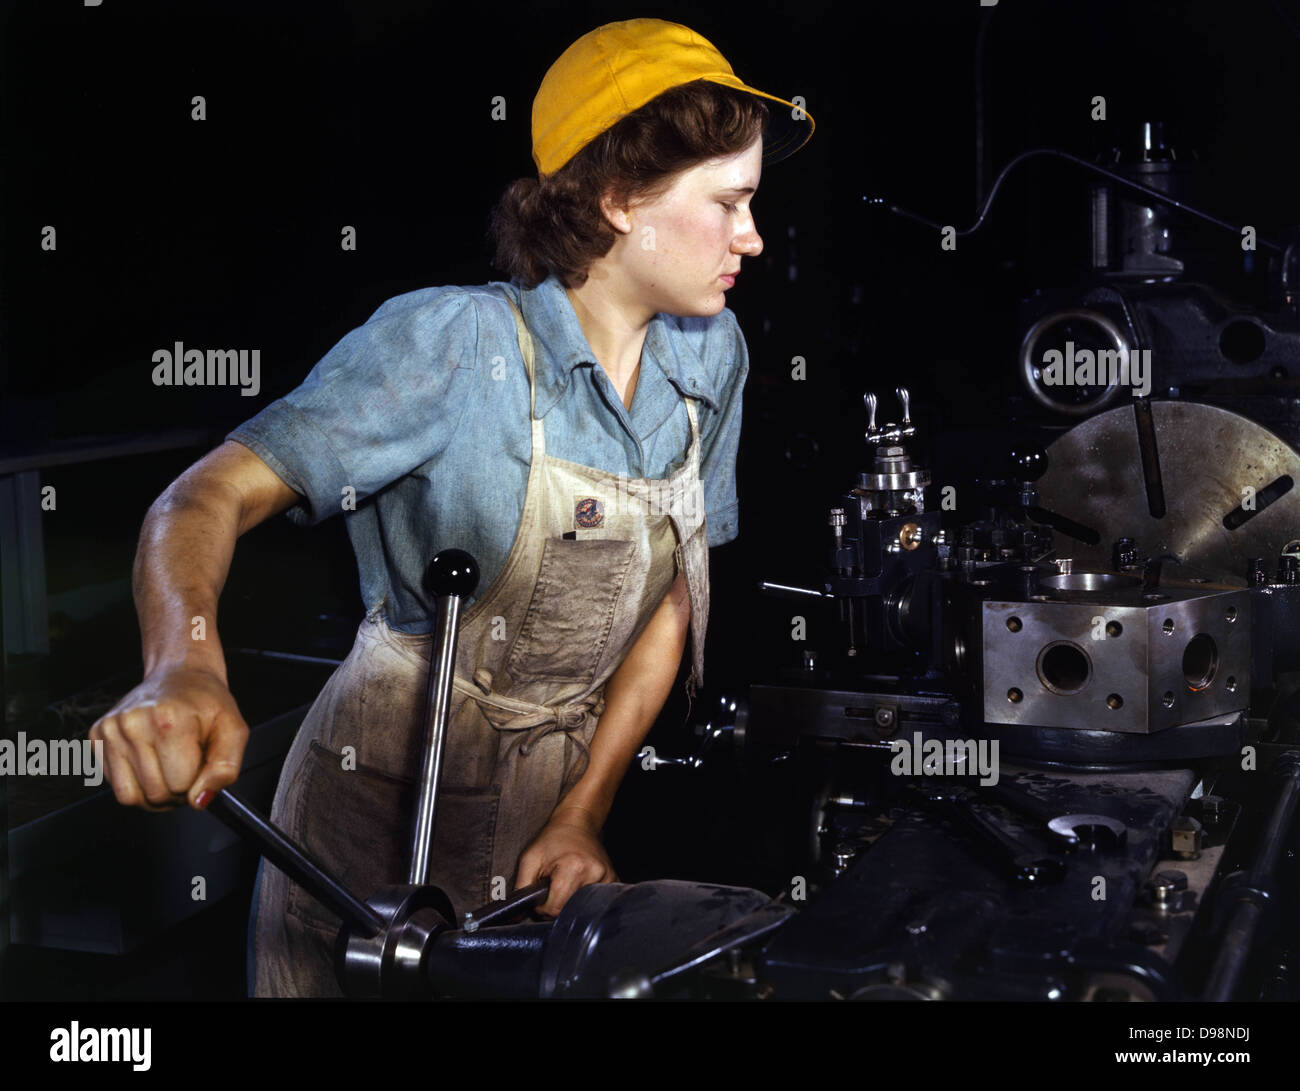 World War II: USA female war worker in the 1940s. During the war women on the home front took over many jobs traditionally done by men. Stock Photo